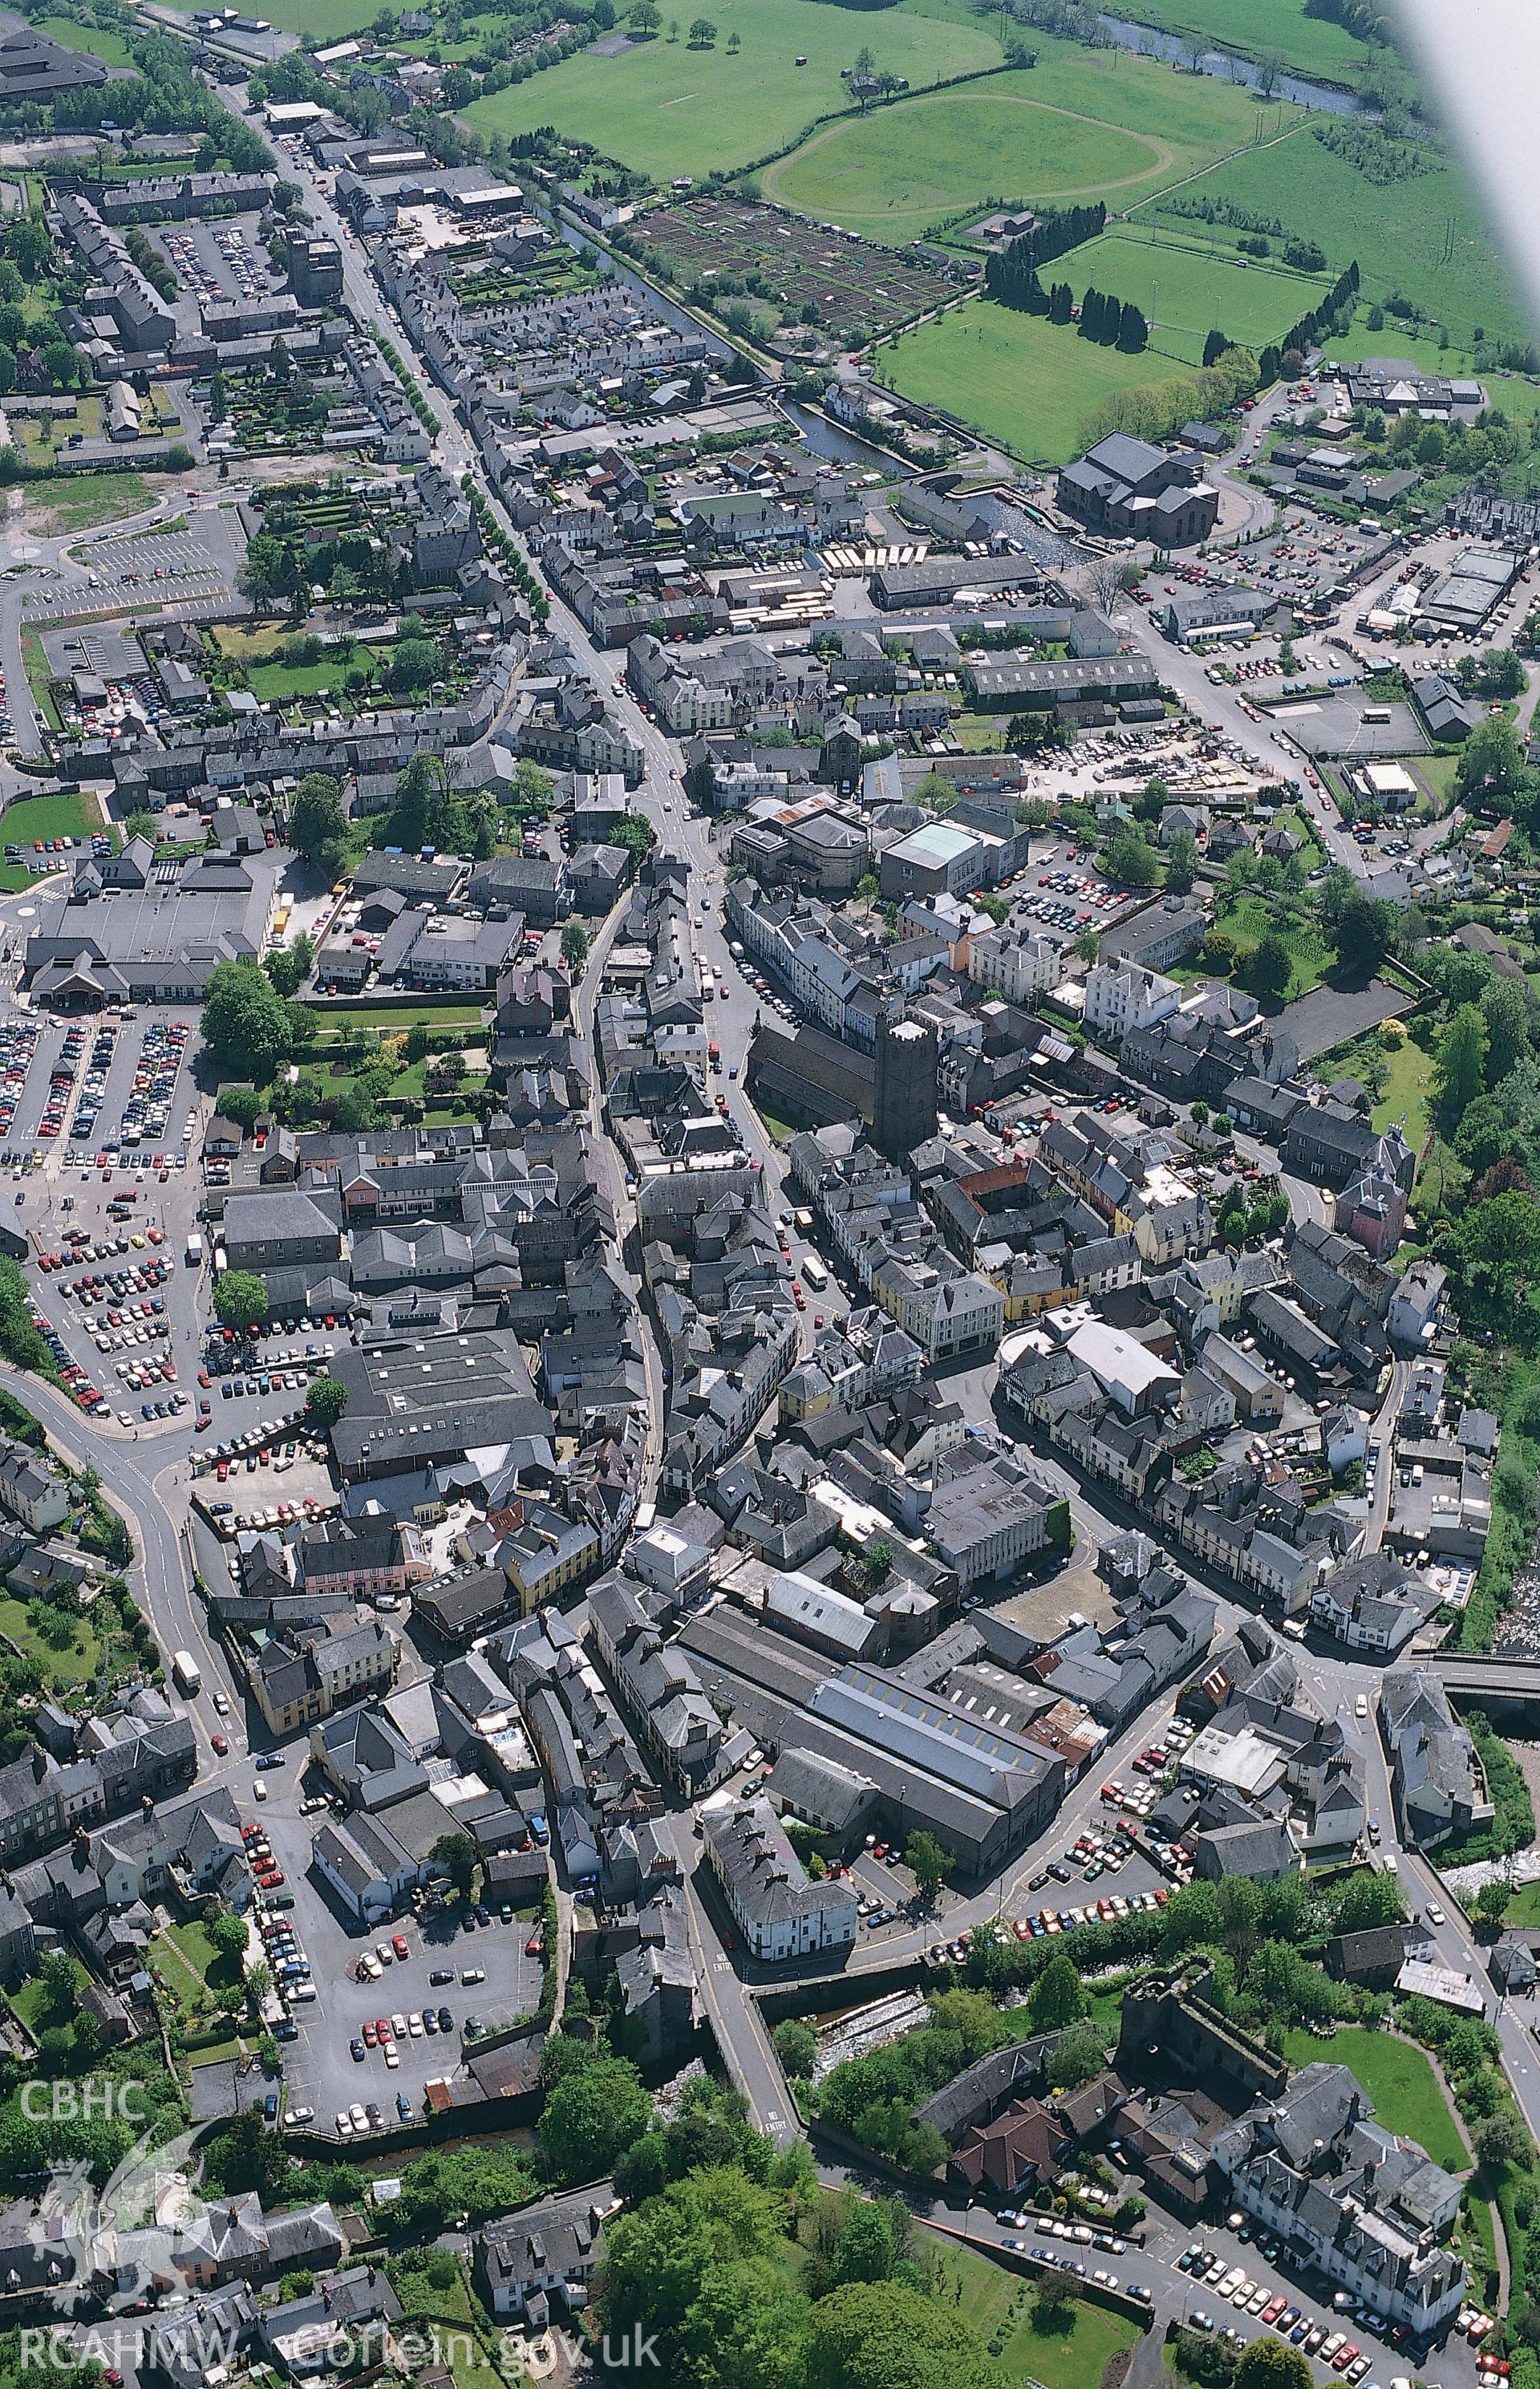 Slide of RCAHMW colour oblique aerial photograph of aerial view of Brecon Town, taken by Toby Driver, 2002.